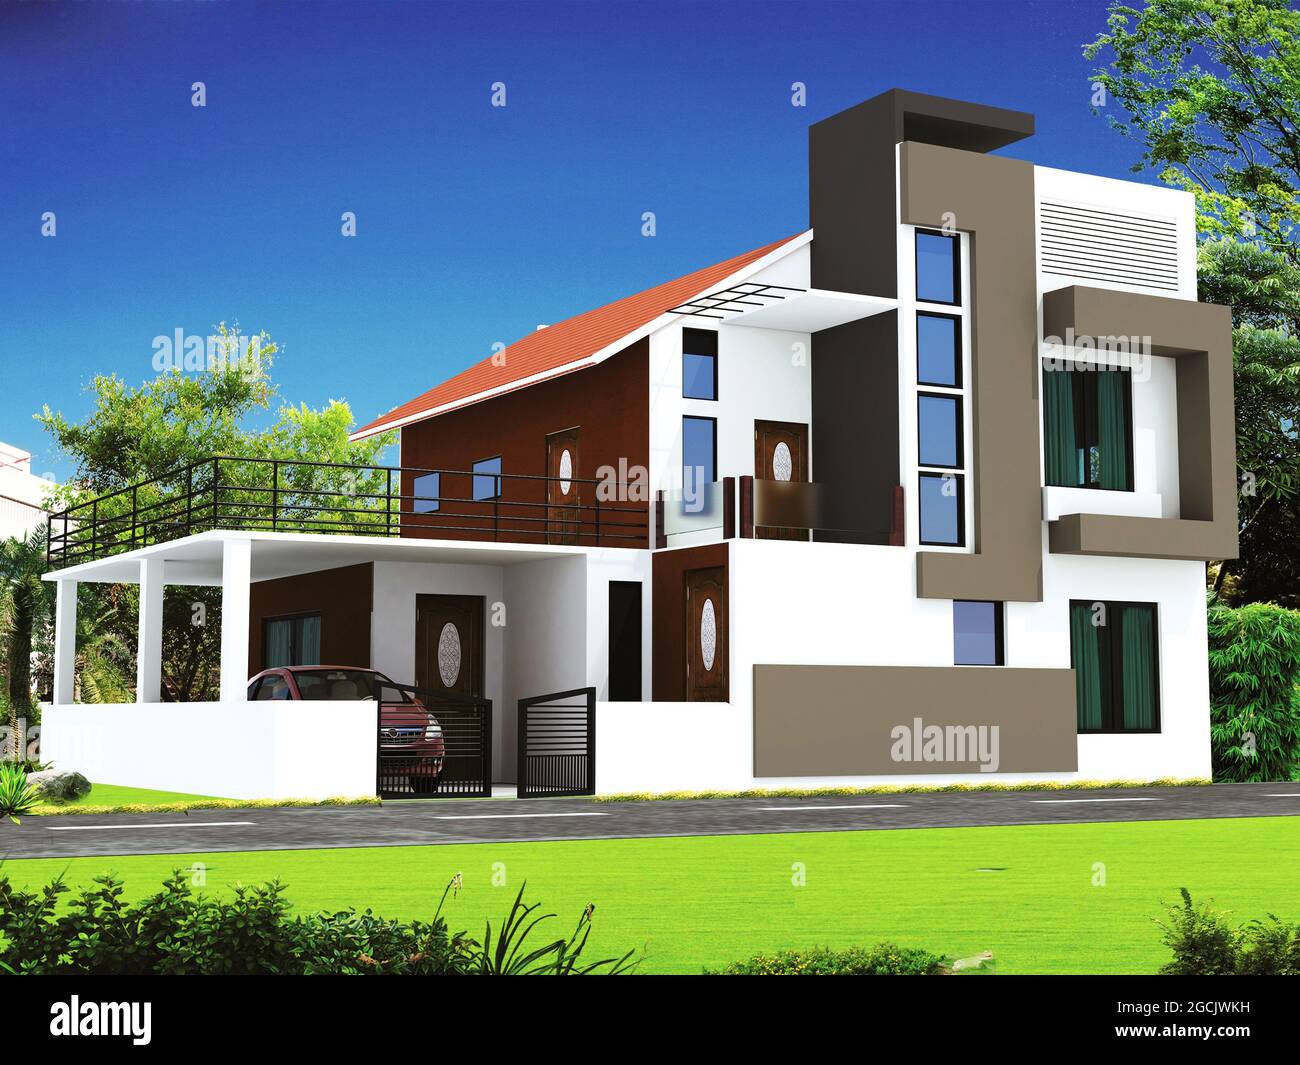 3D rendering of a duplex house with an abstract exterior design ...